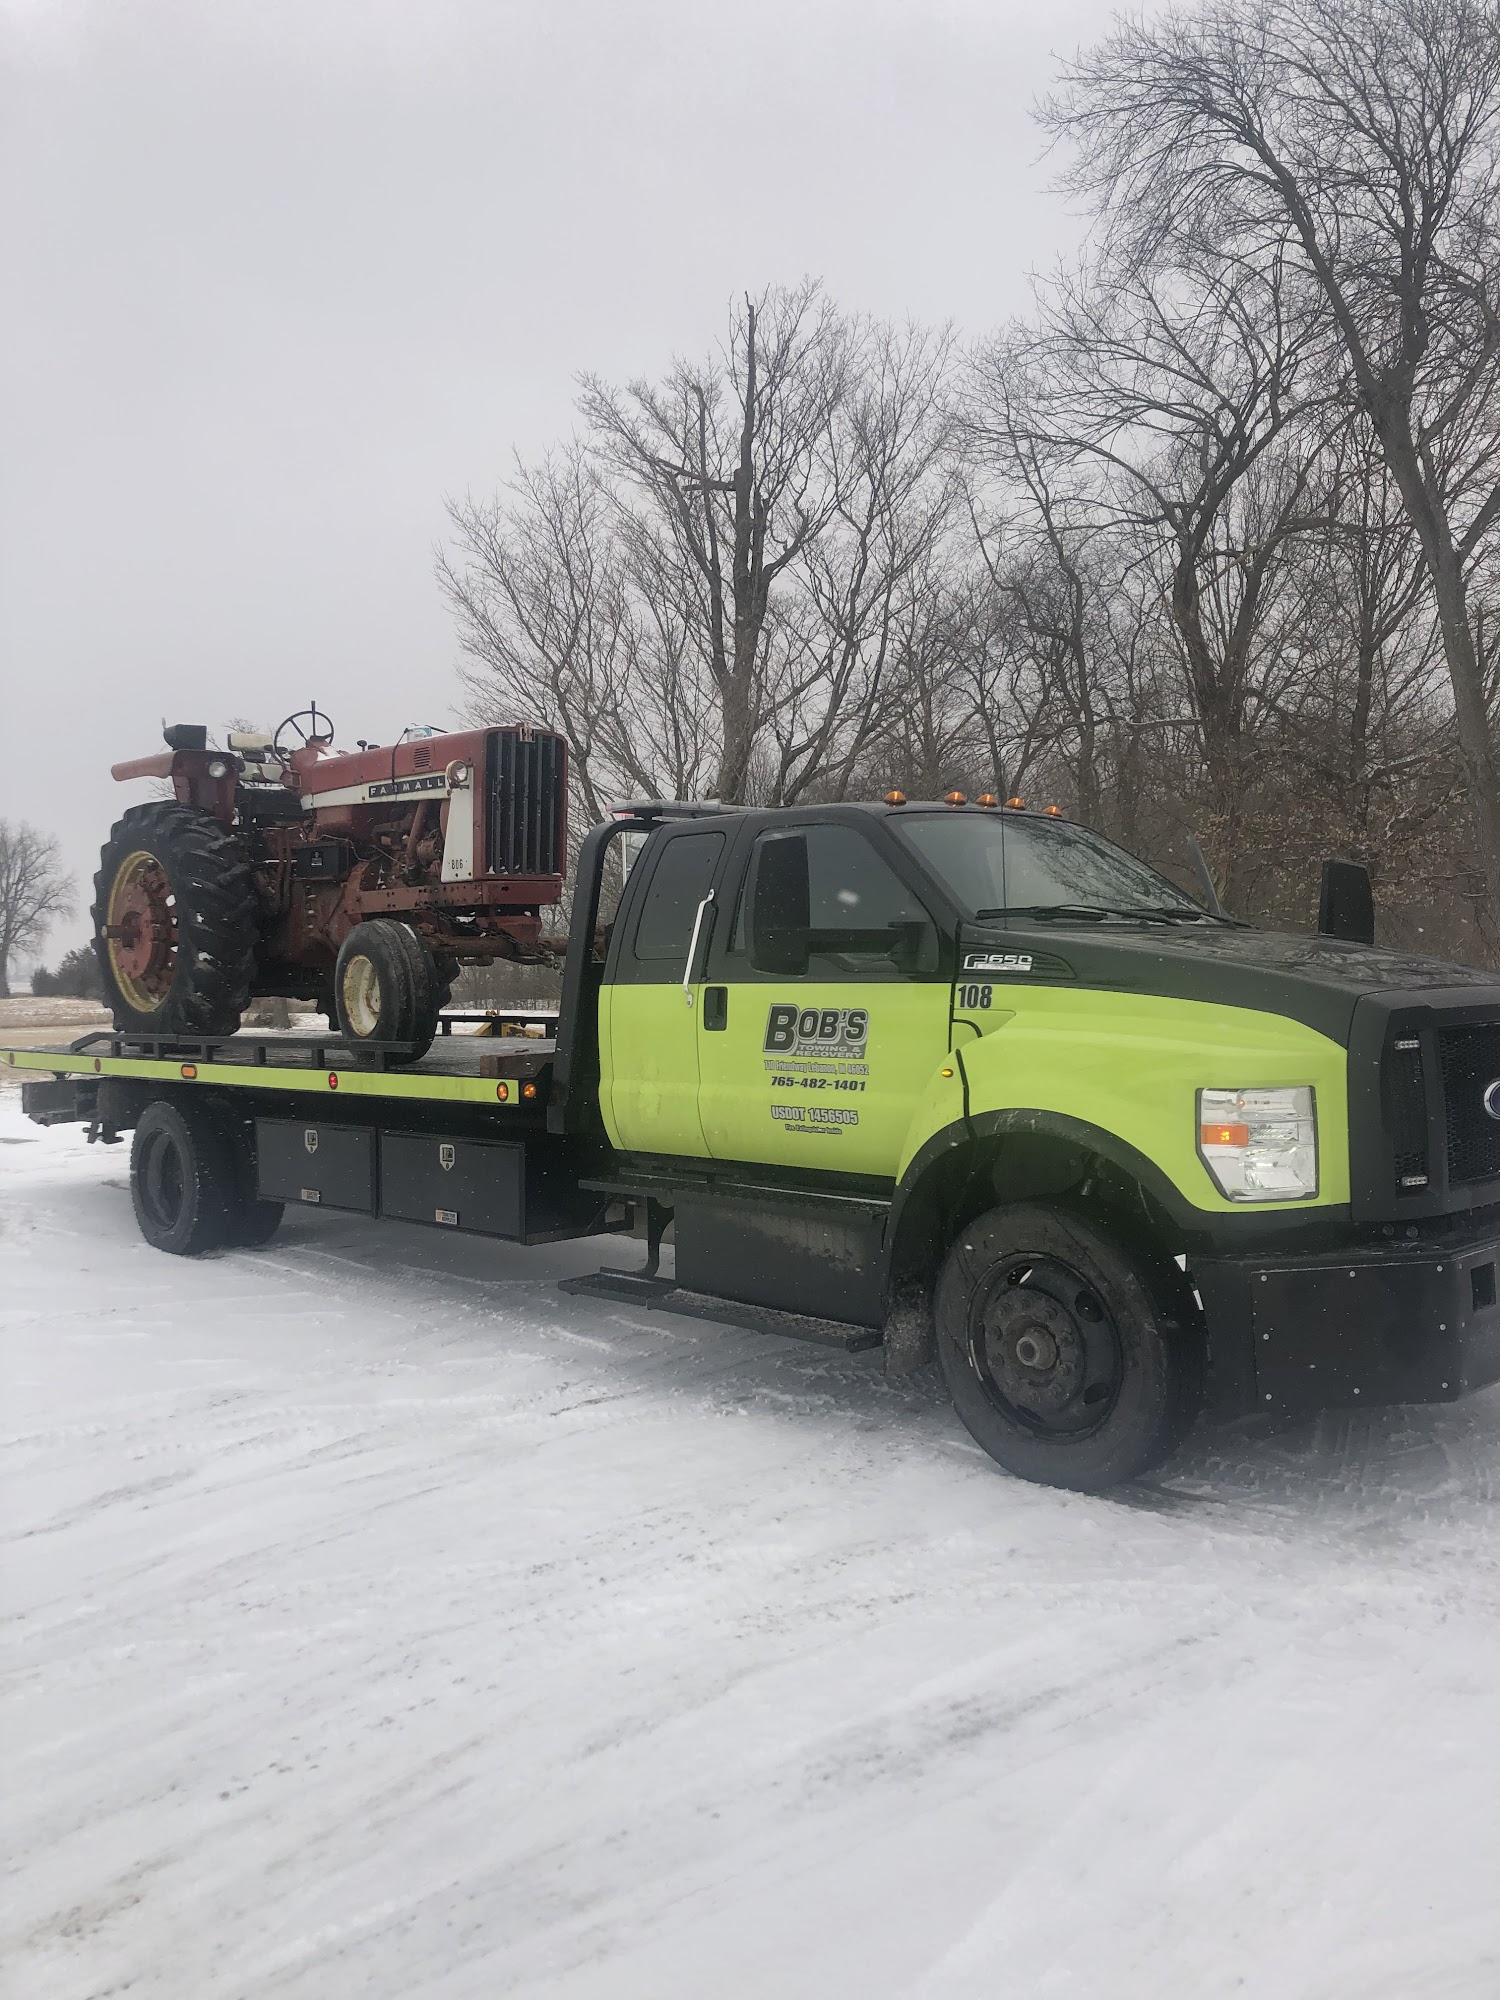 Bob's Towing Recovery Inc